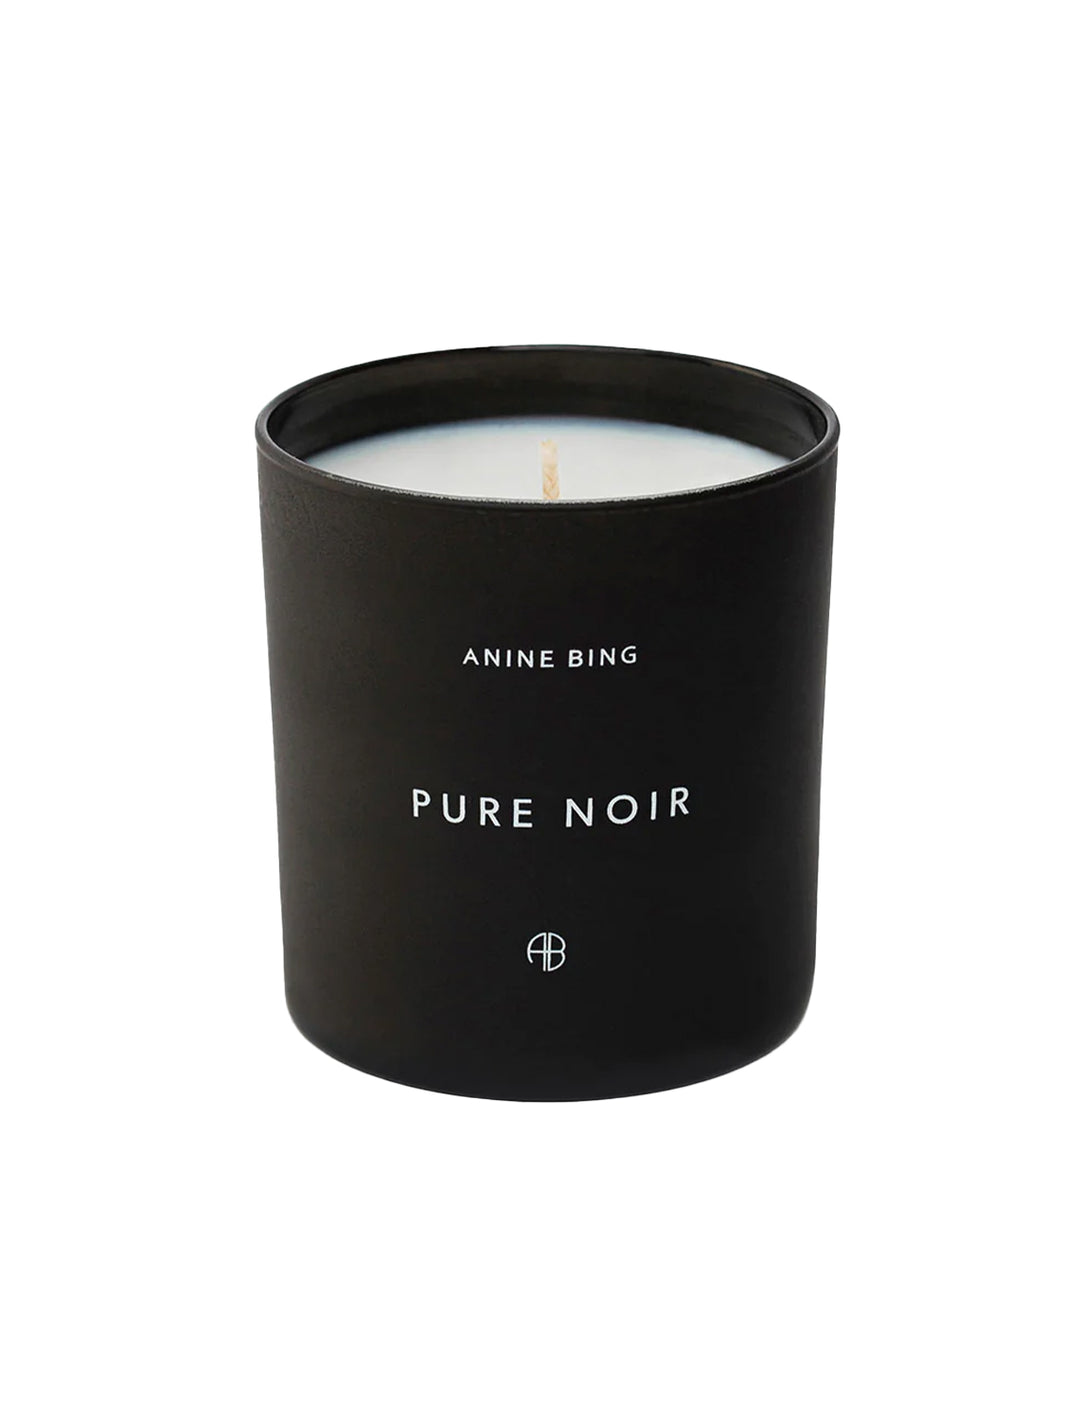 Anine Bing's pure noir candle.